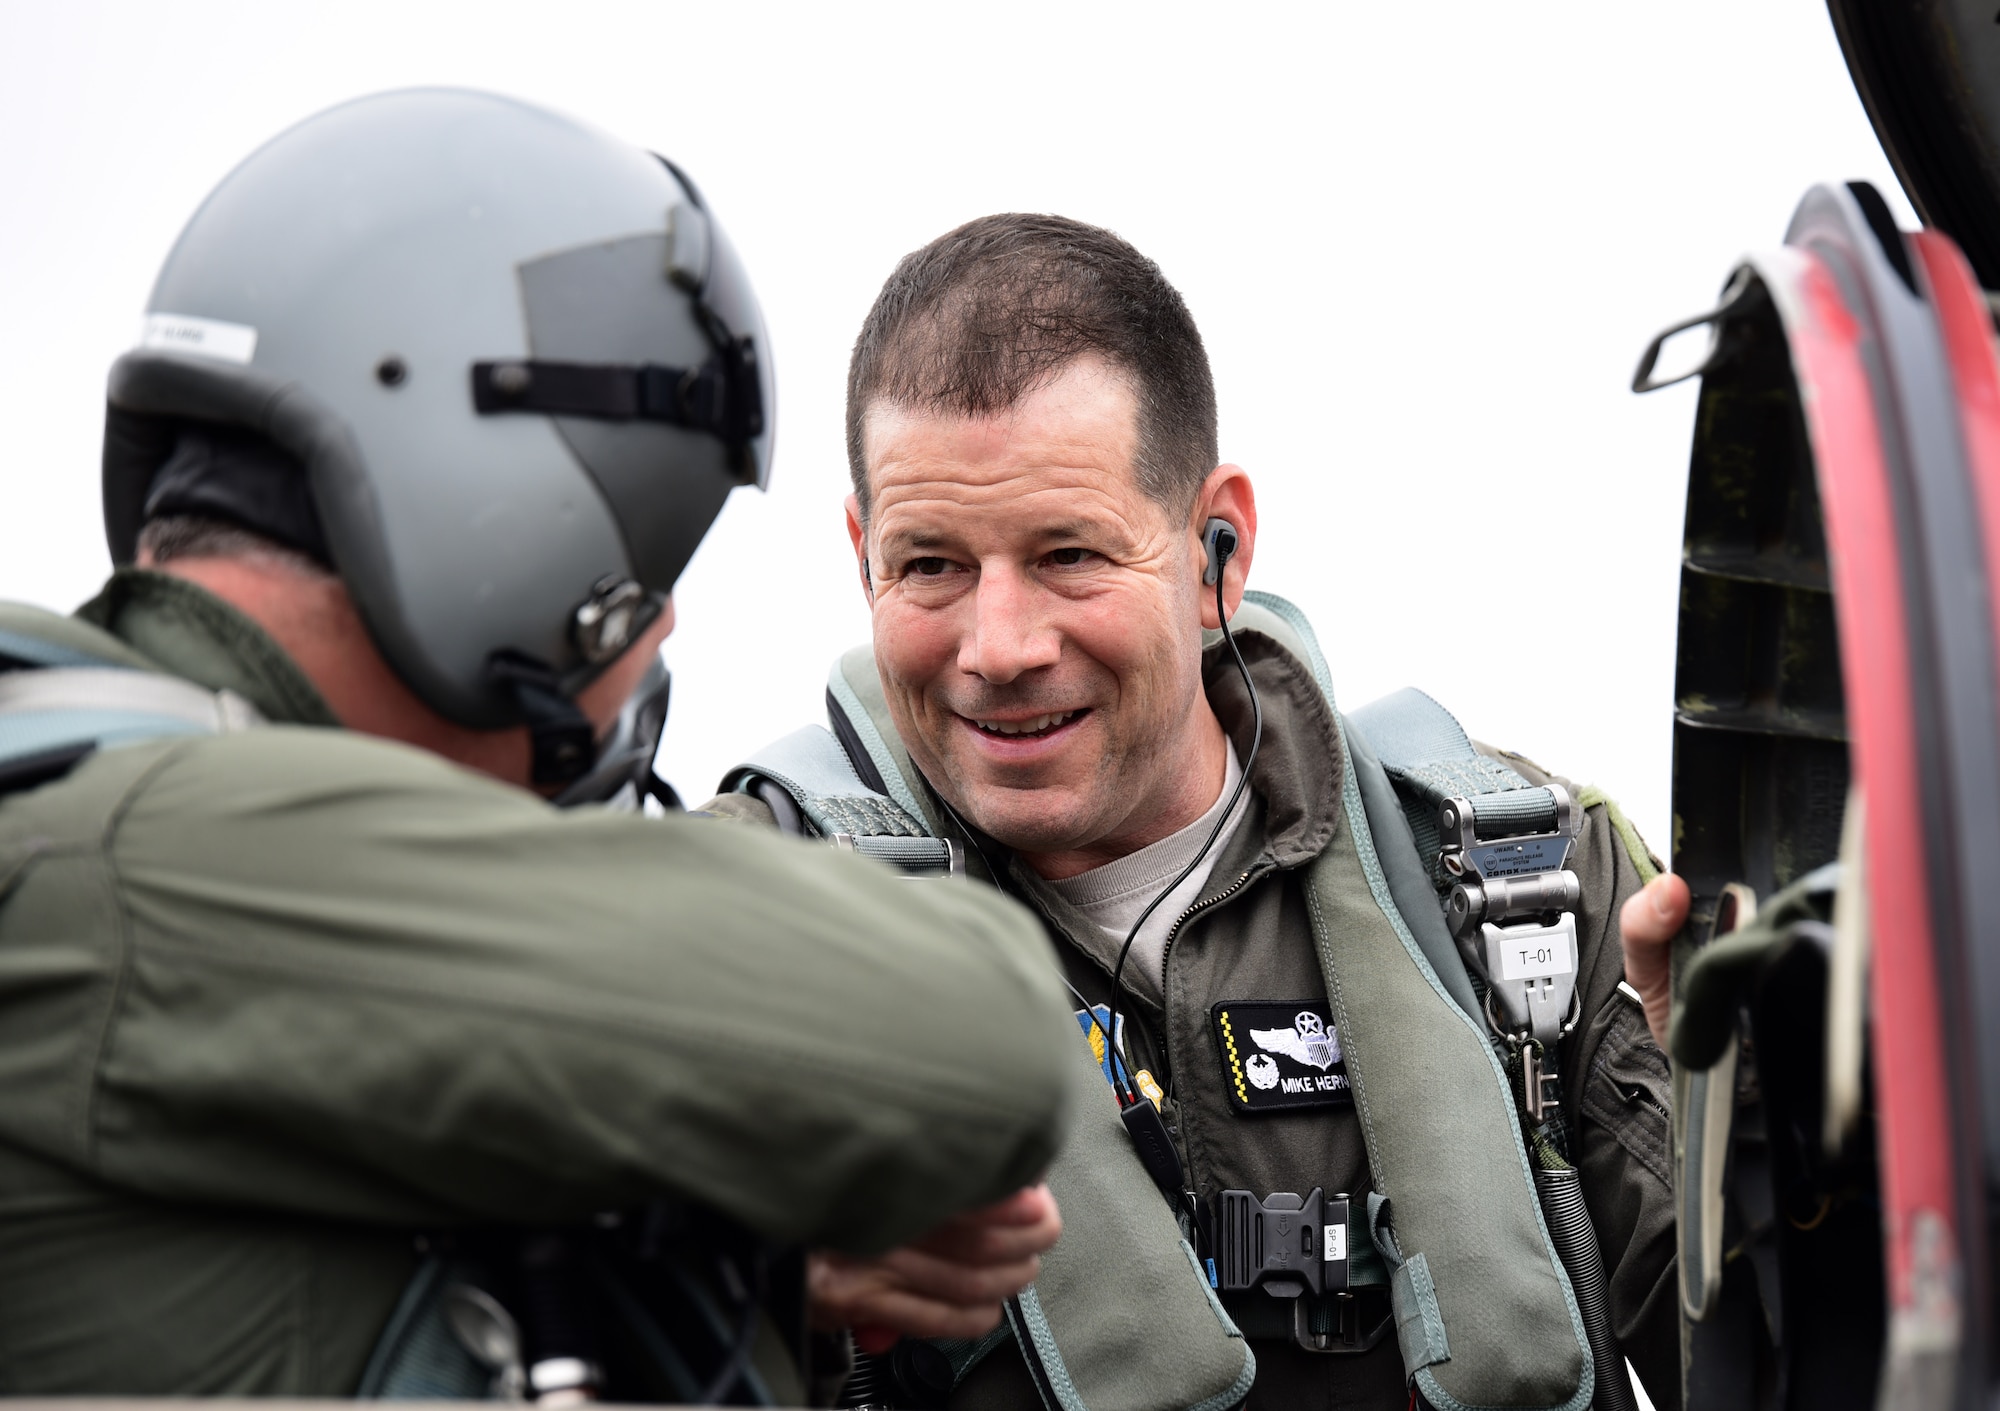 District 2 Bay County Commissioner Robert Carroll (left) shakes hands with U.S. Air Force Col. Michael Hernandez, 325th Fighter Wing commander (right), during a preflight inspection as they prepare to fly in a T-38 Talon familiarization flight at Tyndall Air Force Base, Fla., Feb. 14, 2018. Carroll is part of a five-member governing board elected at-large to represent the citizens of Bay County. (U.S. Air Force photo by Airman 1st Class Isaiah J. Soliz/Released)